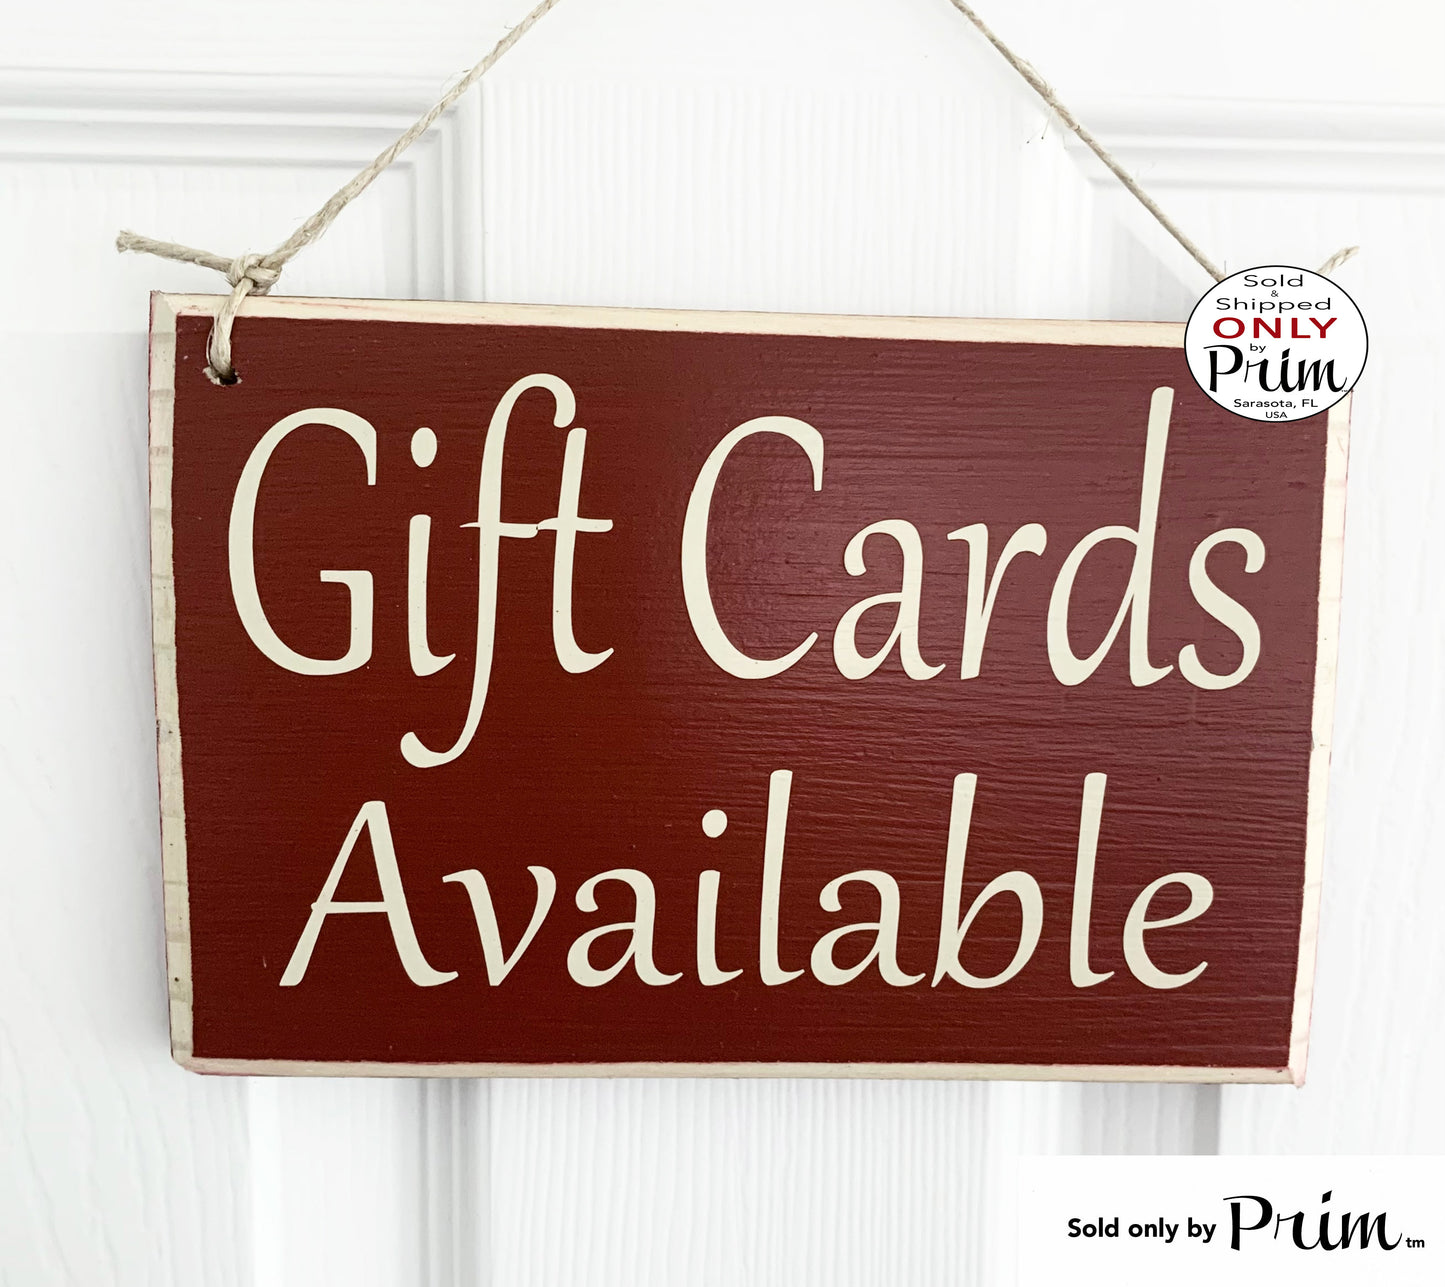 Designs by Prim 8x6 Gift Cards Available Custom Wood Sign | Gift Certificates Store Shop Sign Spa Salon Office Coupon Wall Decor Hanger Door Plaque